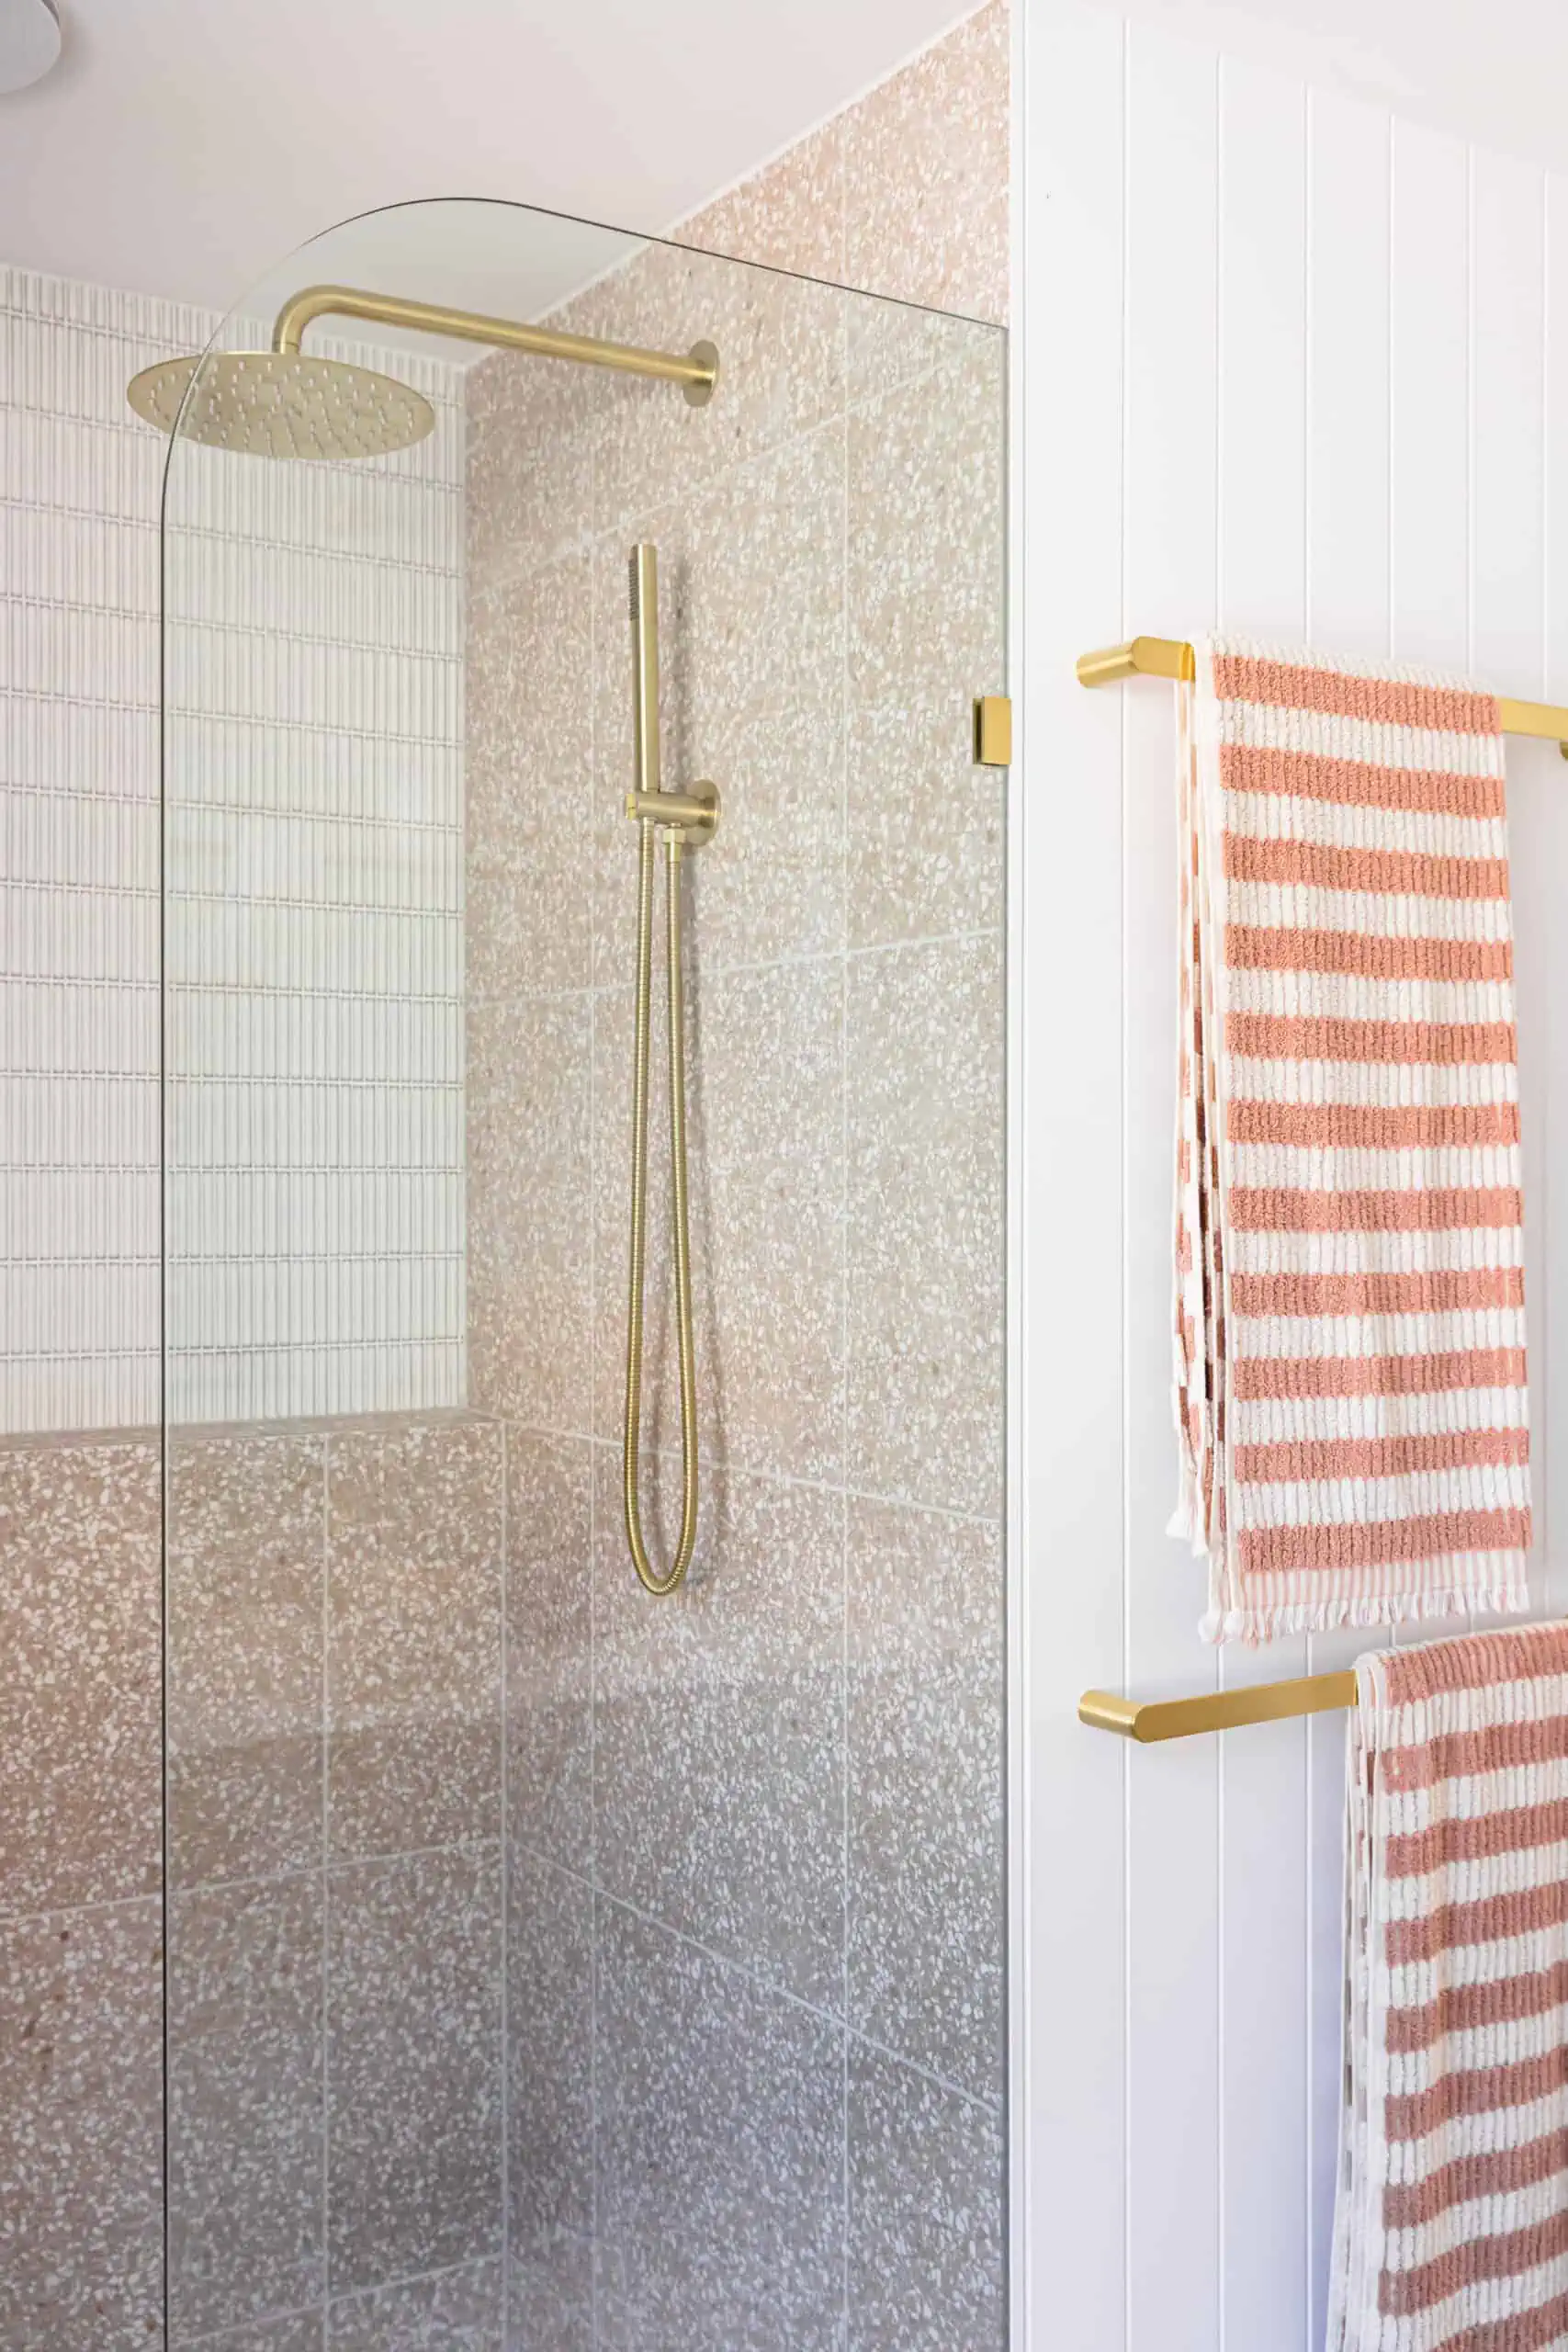 Bathroom renovation after photo showing the shower area with gold accessories and blush pink and white towels.